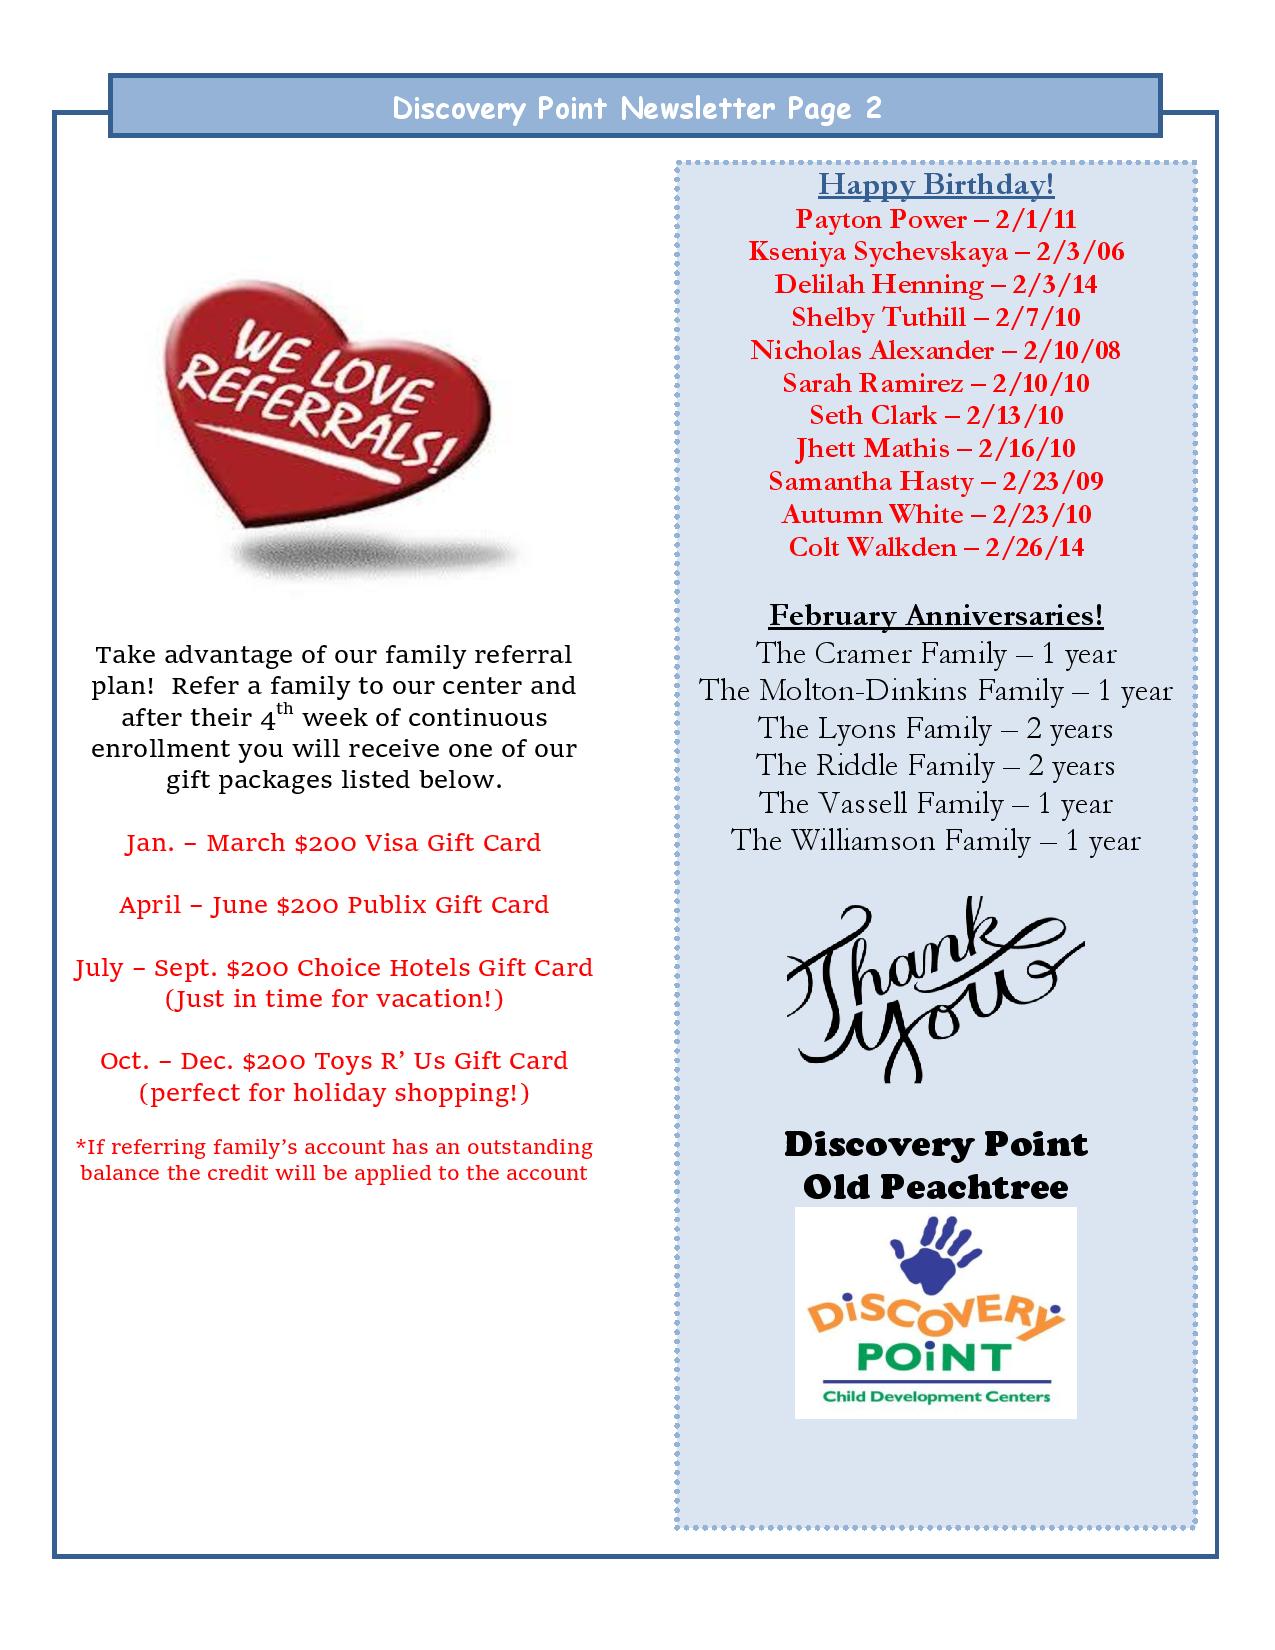 Discovery Point Old Peachtree February 2015 Newsletter Page 2